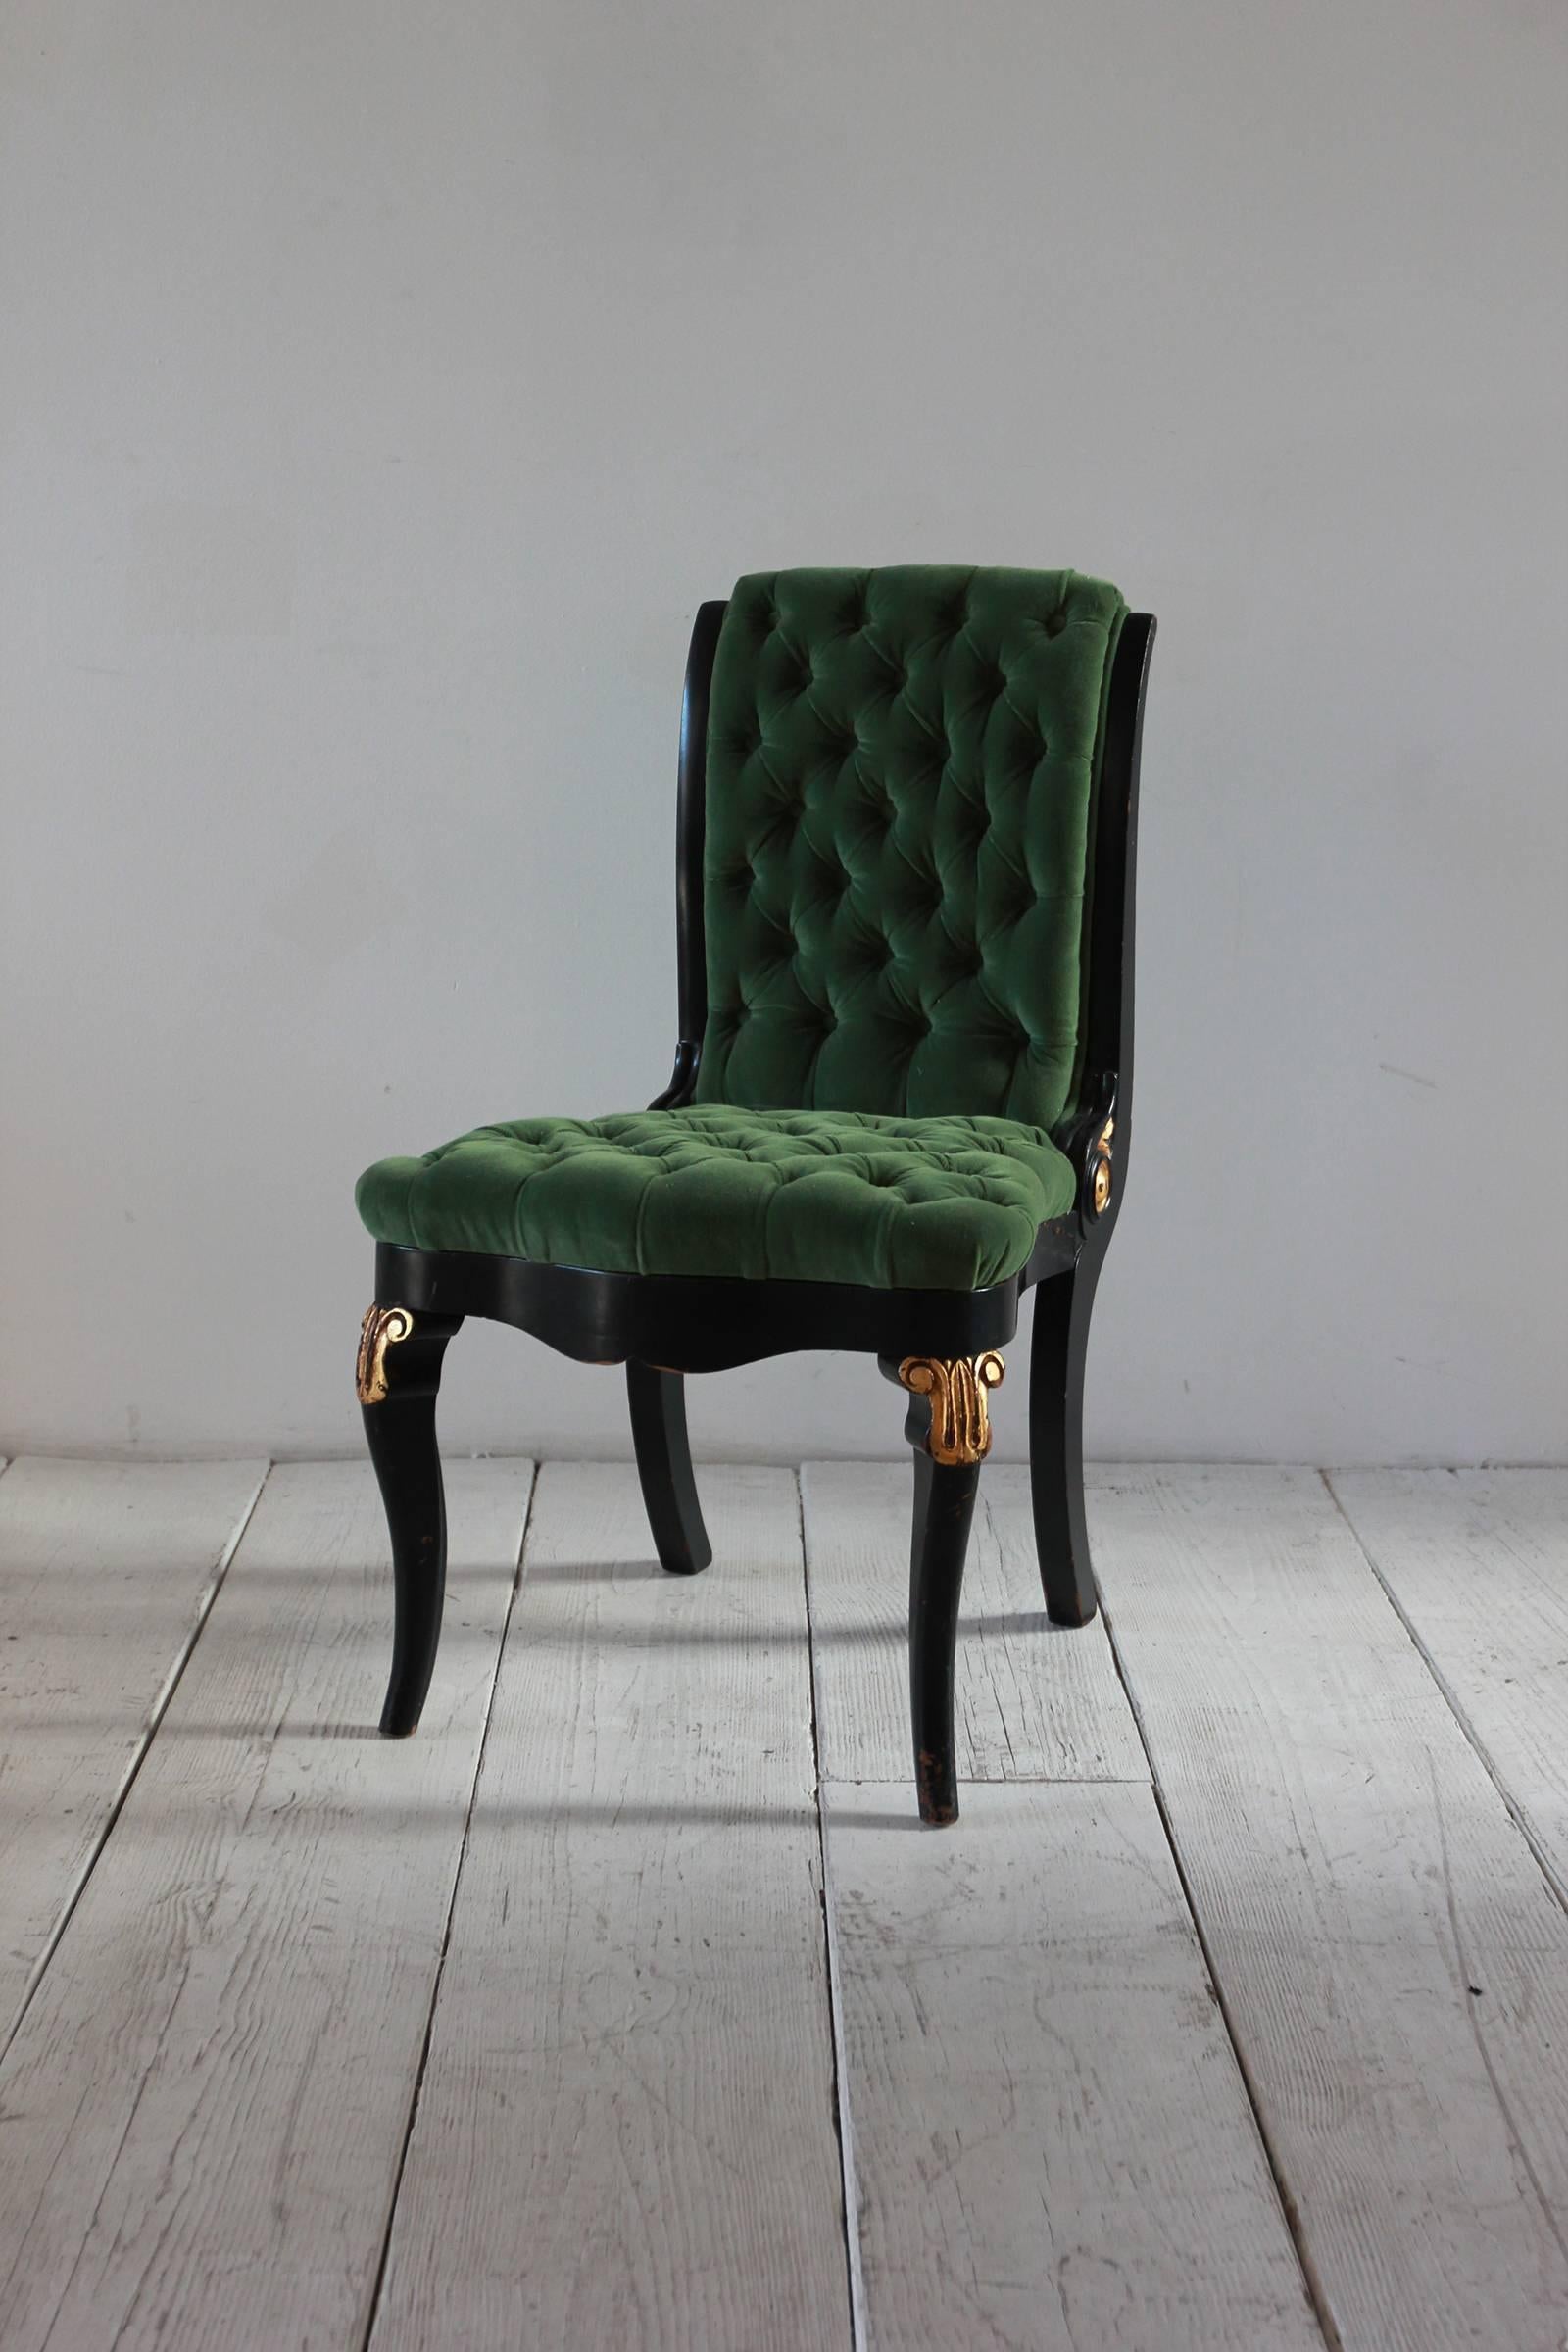 Black and gold painted Regency chair upholstered in green velvet with tufting details.